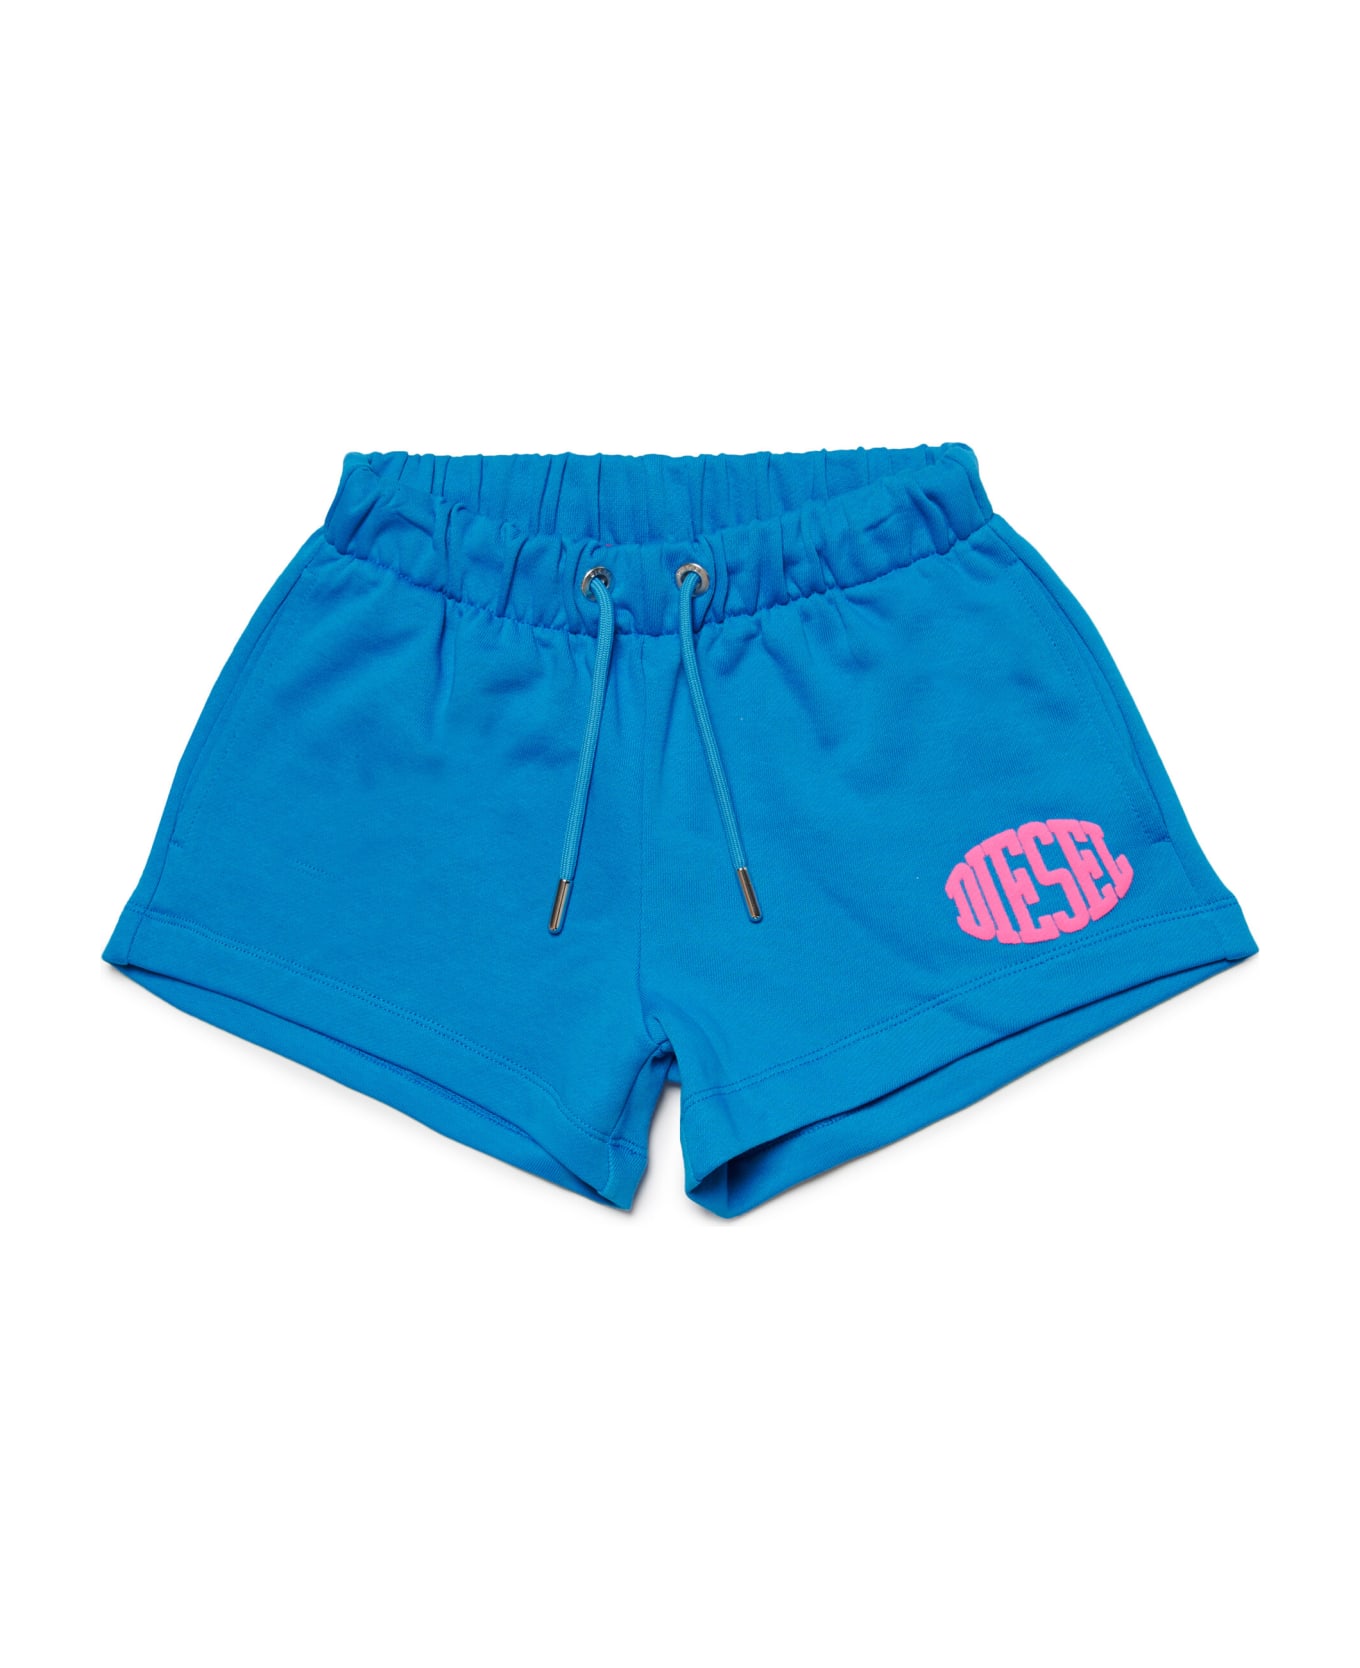 Diesel Paglife Shorts Diesel Fleece Shorts With Puffy Print